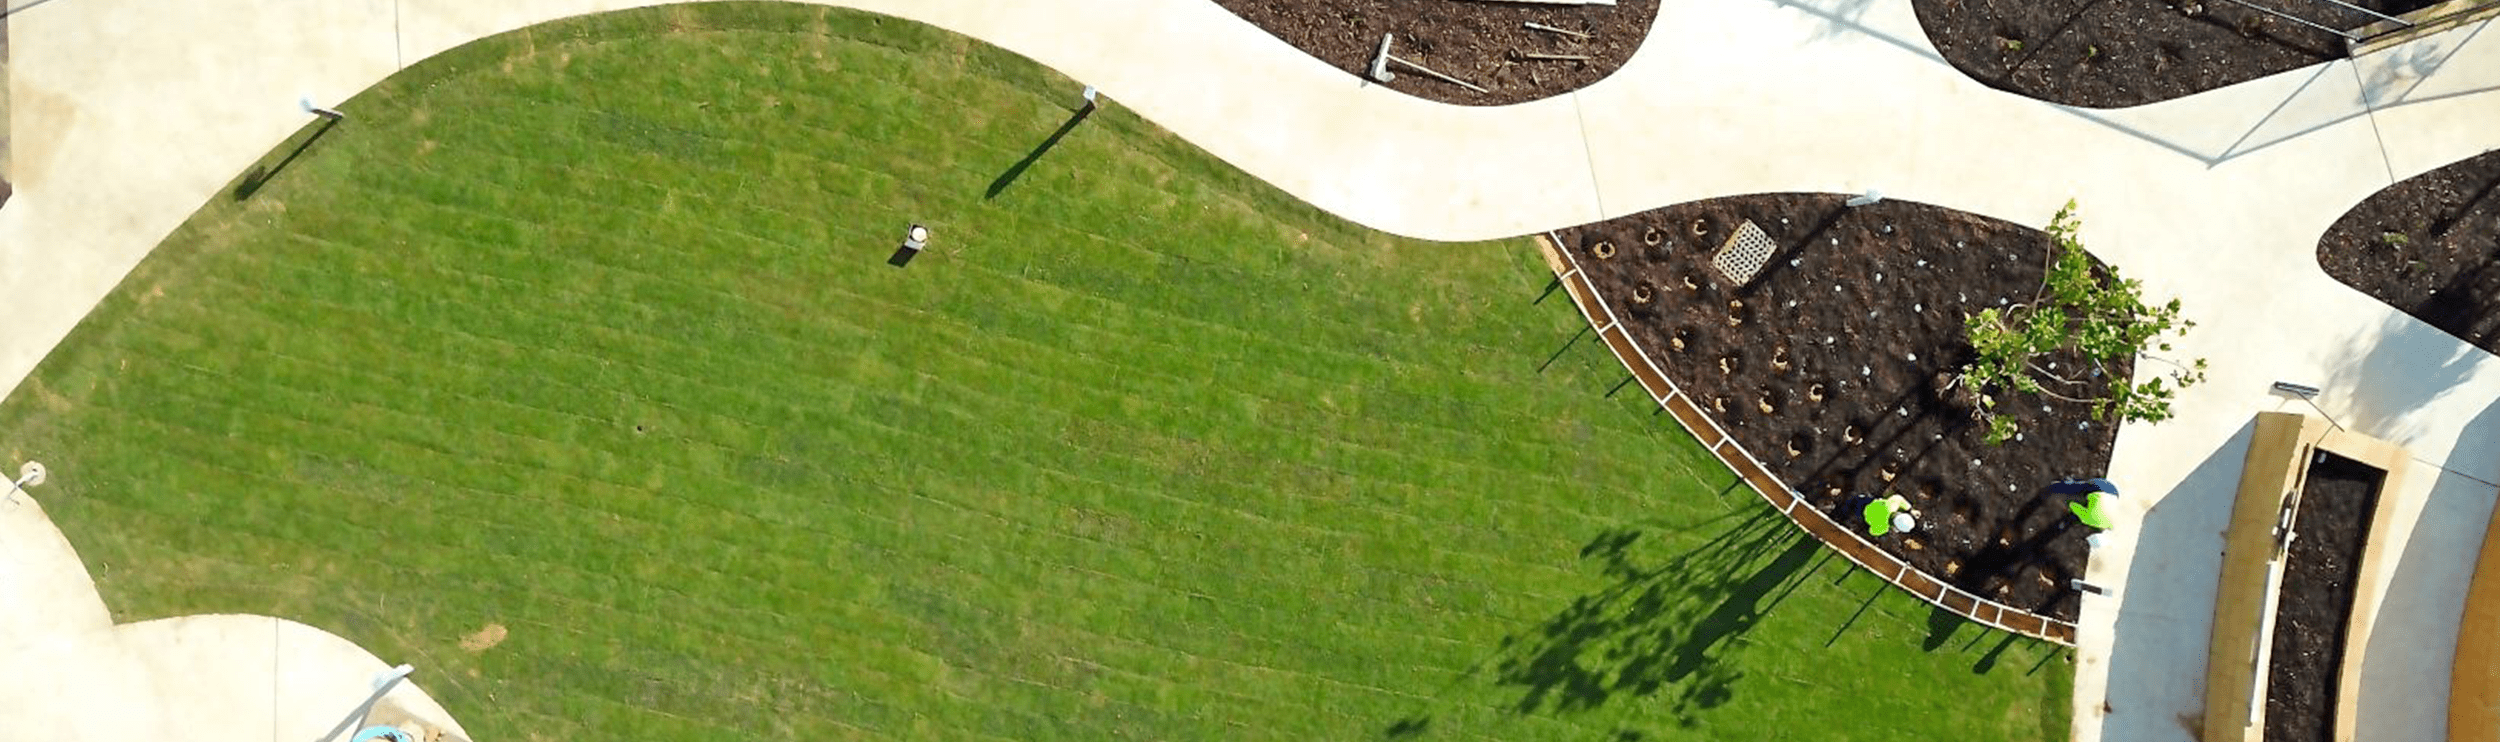 aged care landscaping-min.png